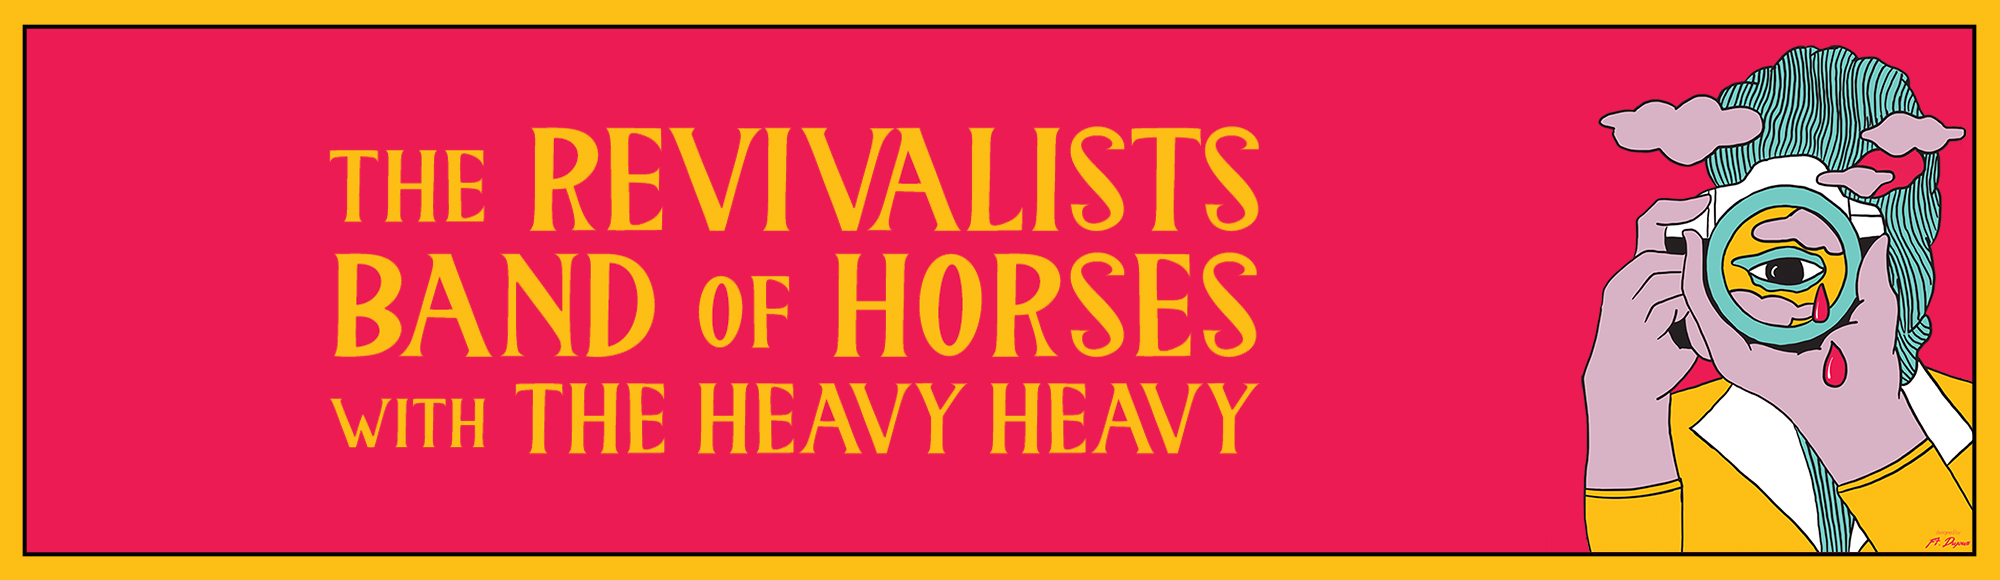 The Revivalists and Band of Horses show